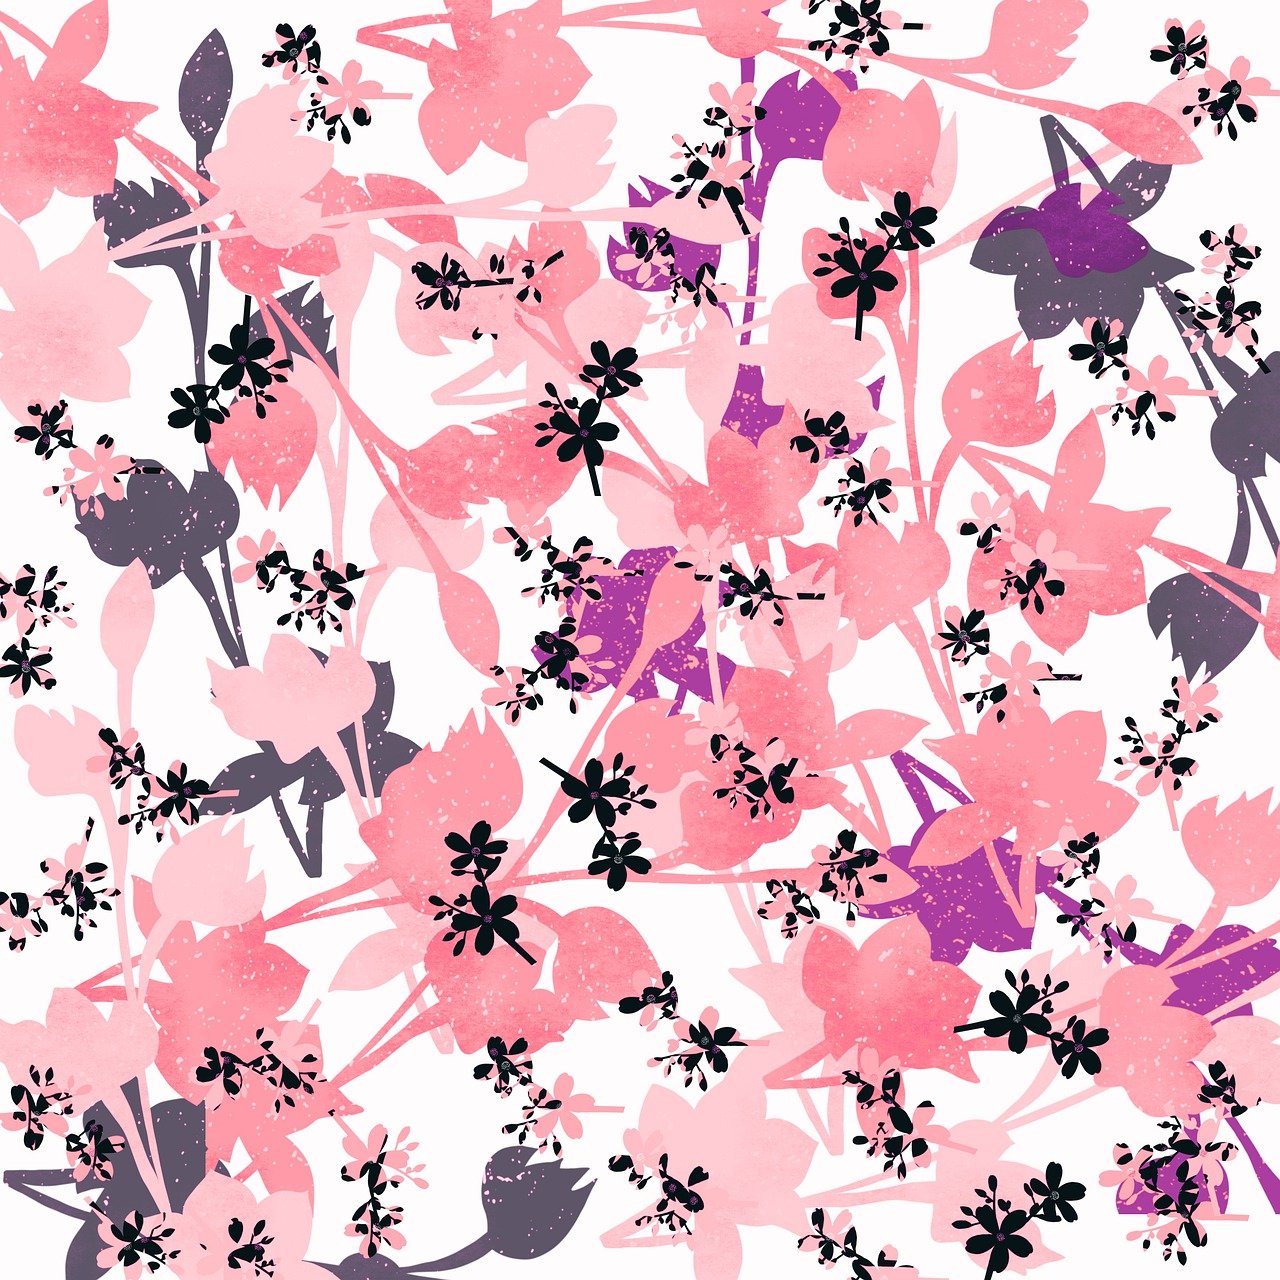 a pattern of flowers and birds on a white background, concept art, inspired by James Brooks, pink mist, splatter paint on paper, plum blossom, scrapbook paper collage